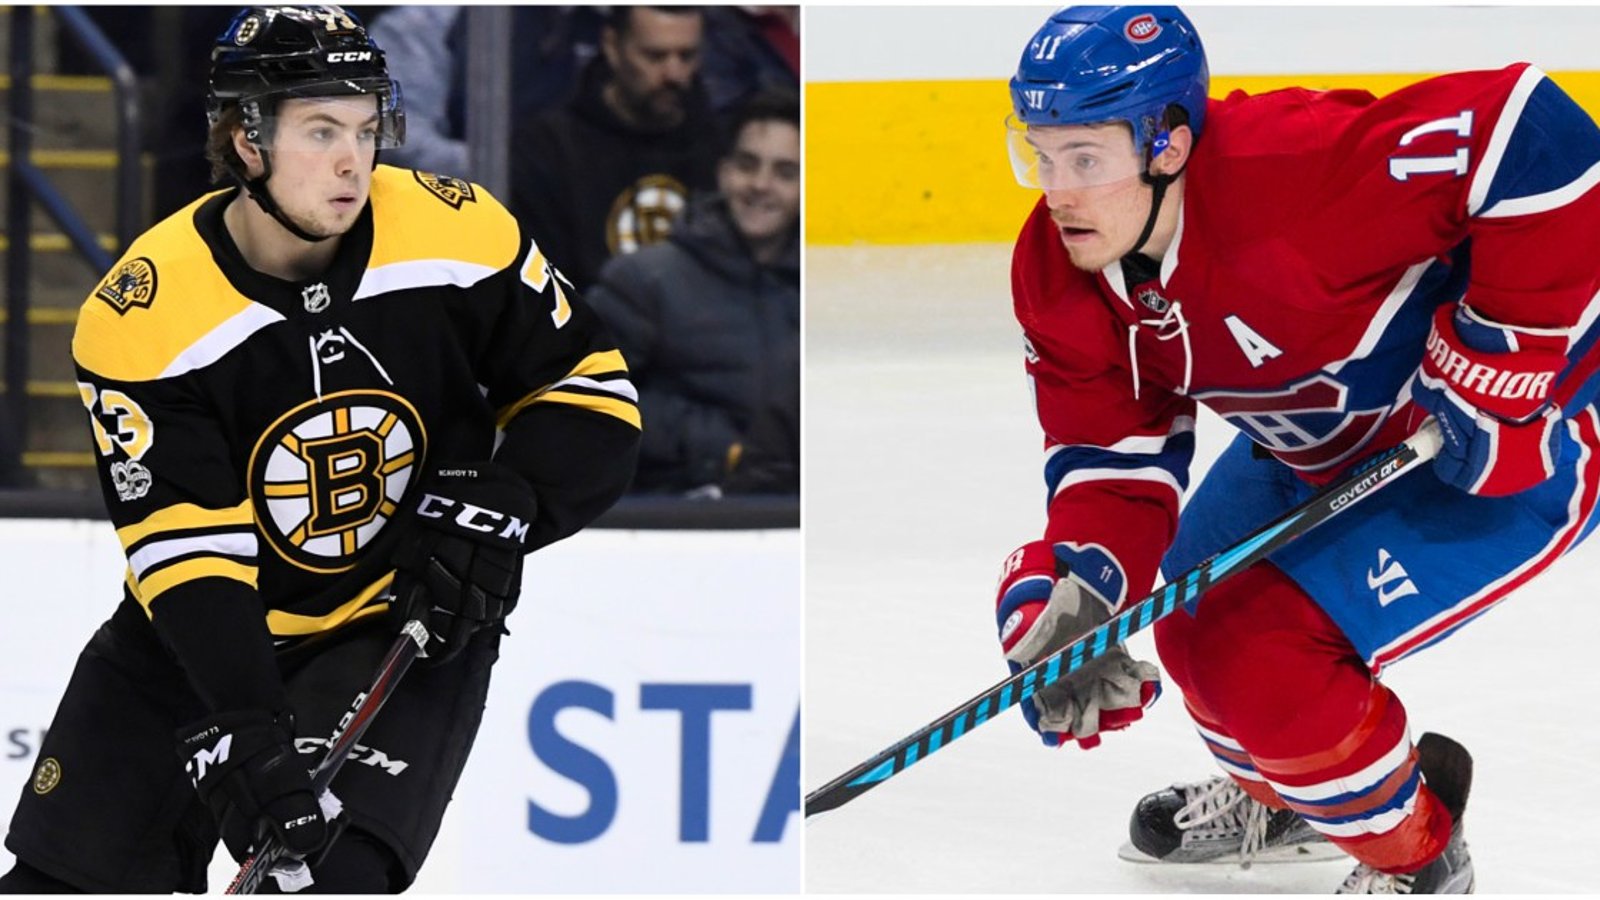 BREAKING: We have a video of Brendan Gallagher potentially injuring McAvoy!